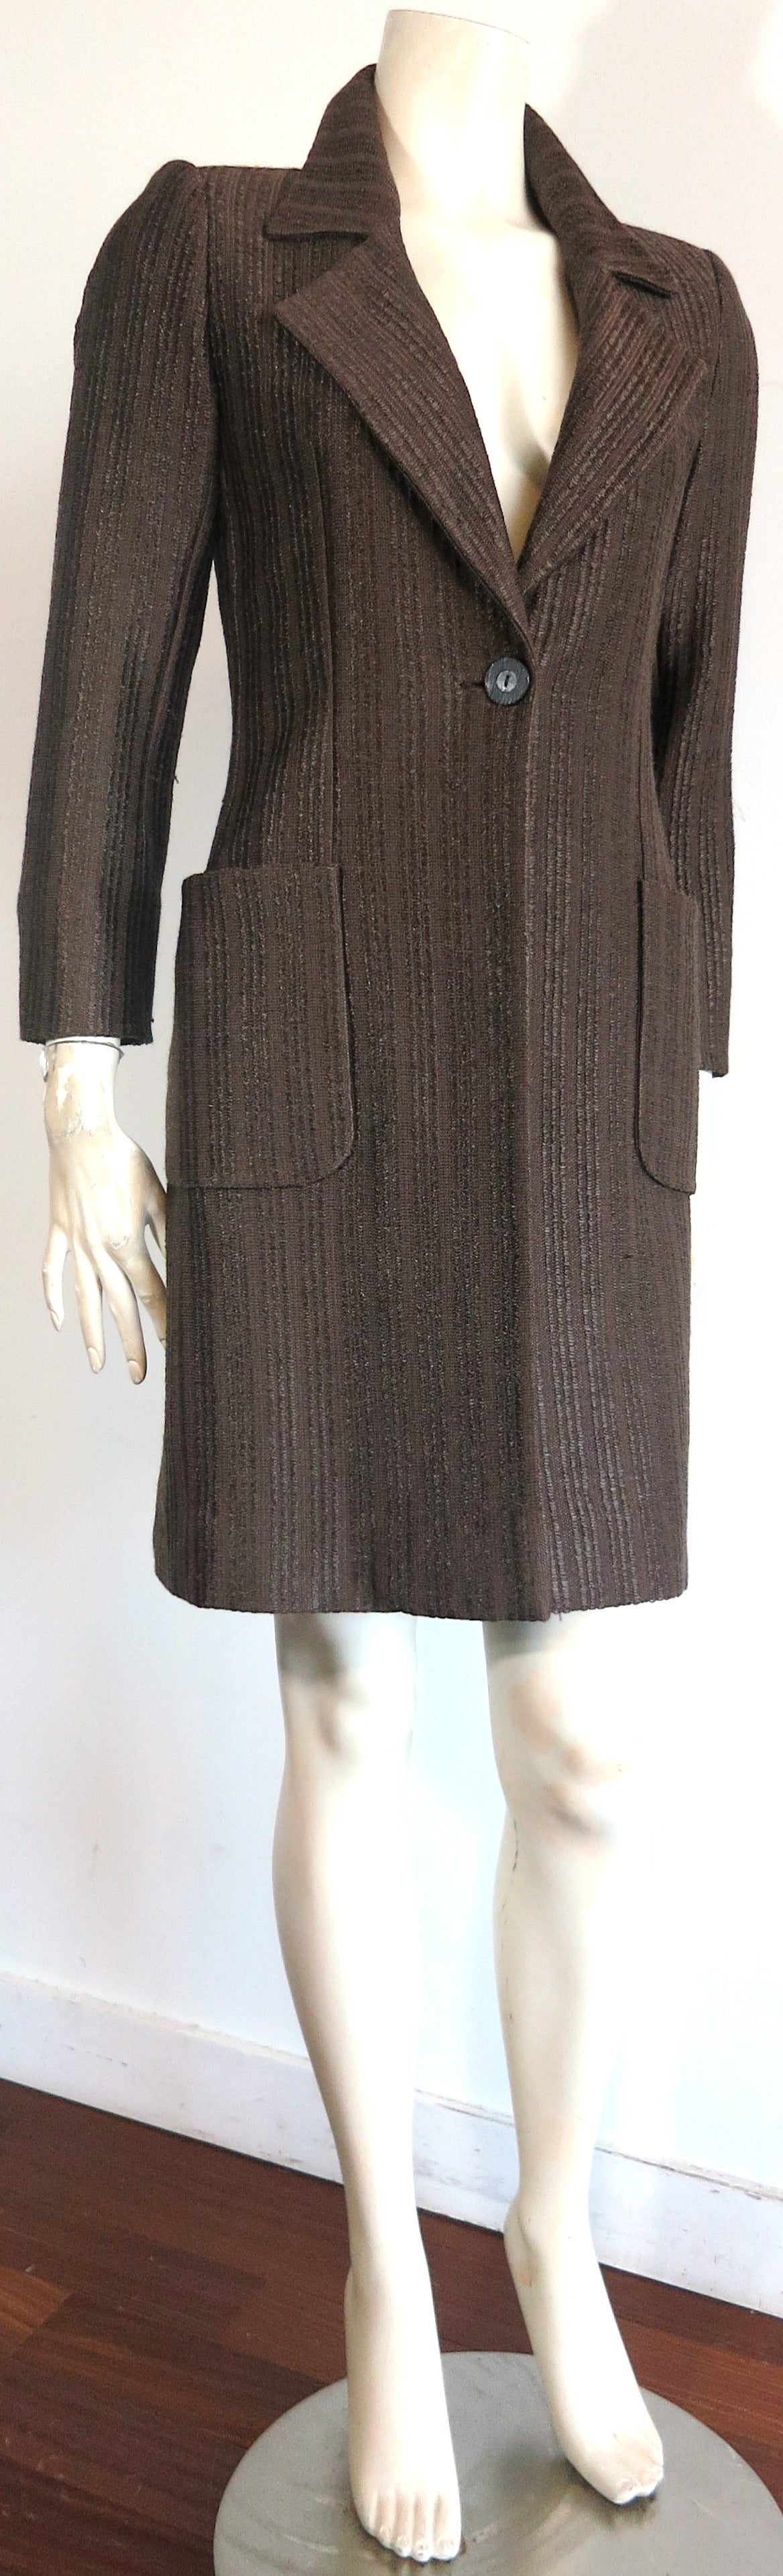 Excellent condition, 1990's YVES SAINT LAURENT Rive Gauche Raffia-weave coat in rick, dark brown color.

This amazing, textural coat is made of a cotton/viscose, raffia-style woven fabrication with a natural, slick surface reminiscent of basketry